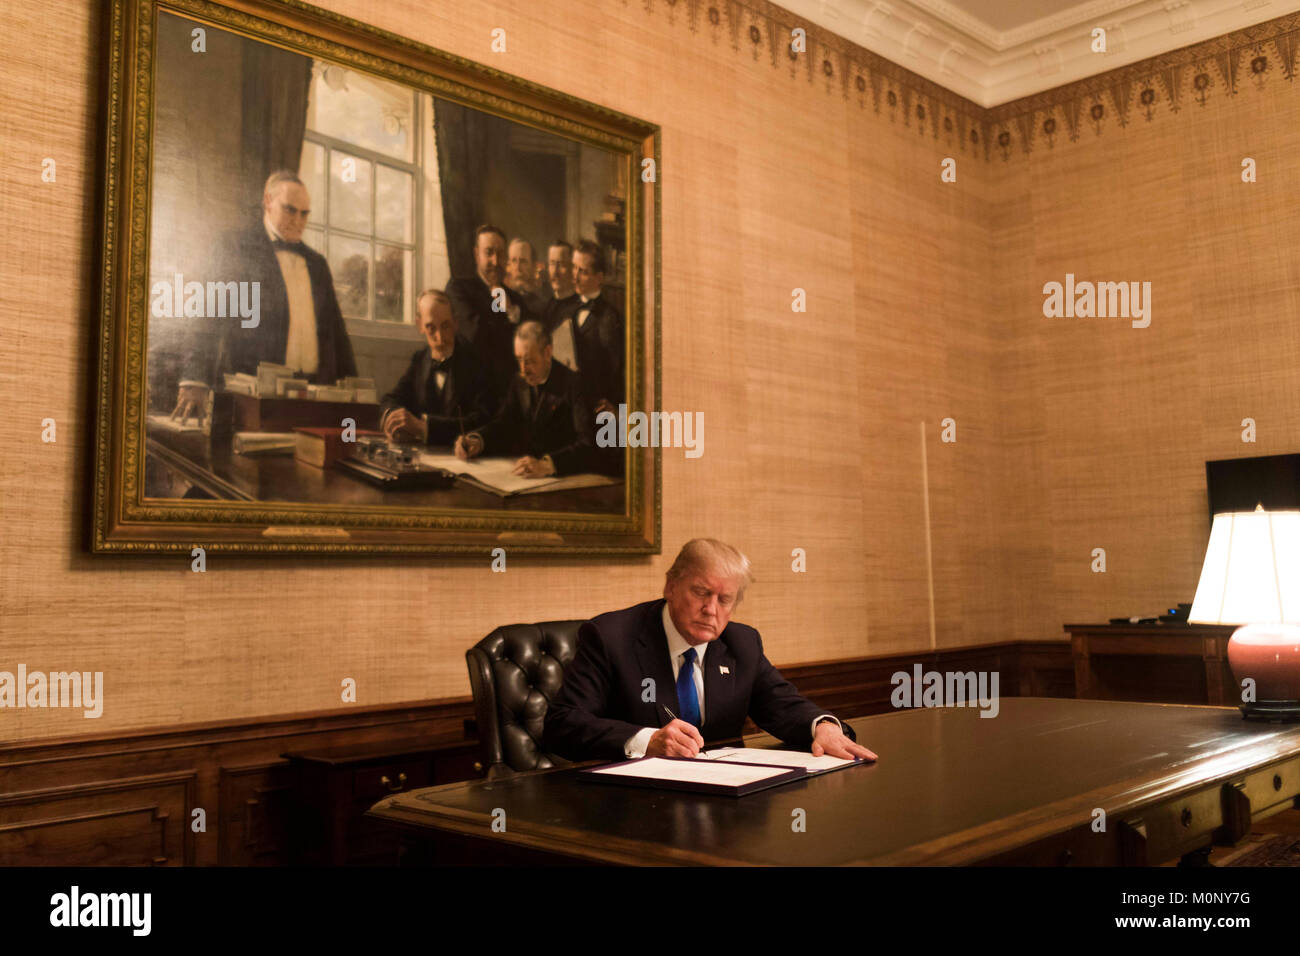 U.S. President Donald Trump signs the Extension of Continuing Appropriations Act January 22, 2018 in Washington, DC. The signing is a three week stopgap funding bill to re-open the federal government following the stalemate over immigration reform. Stock Photo